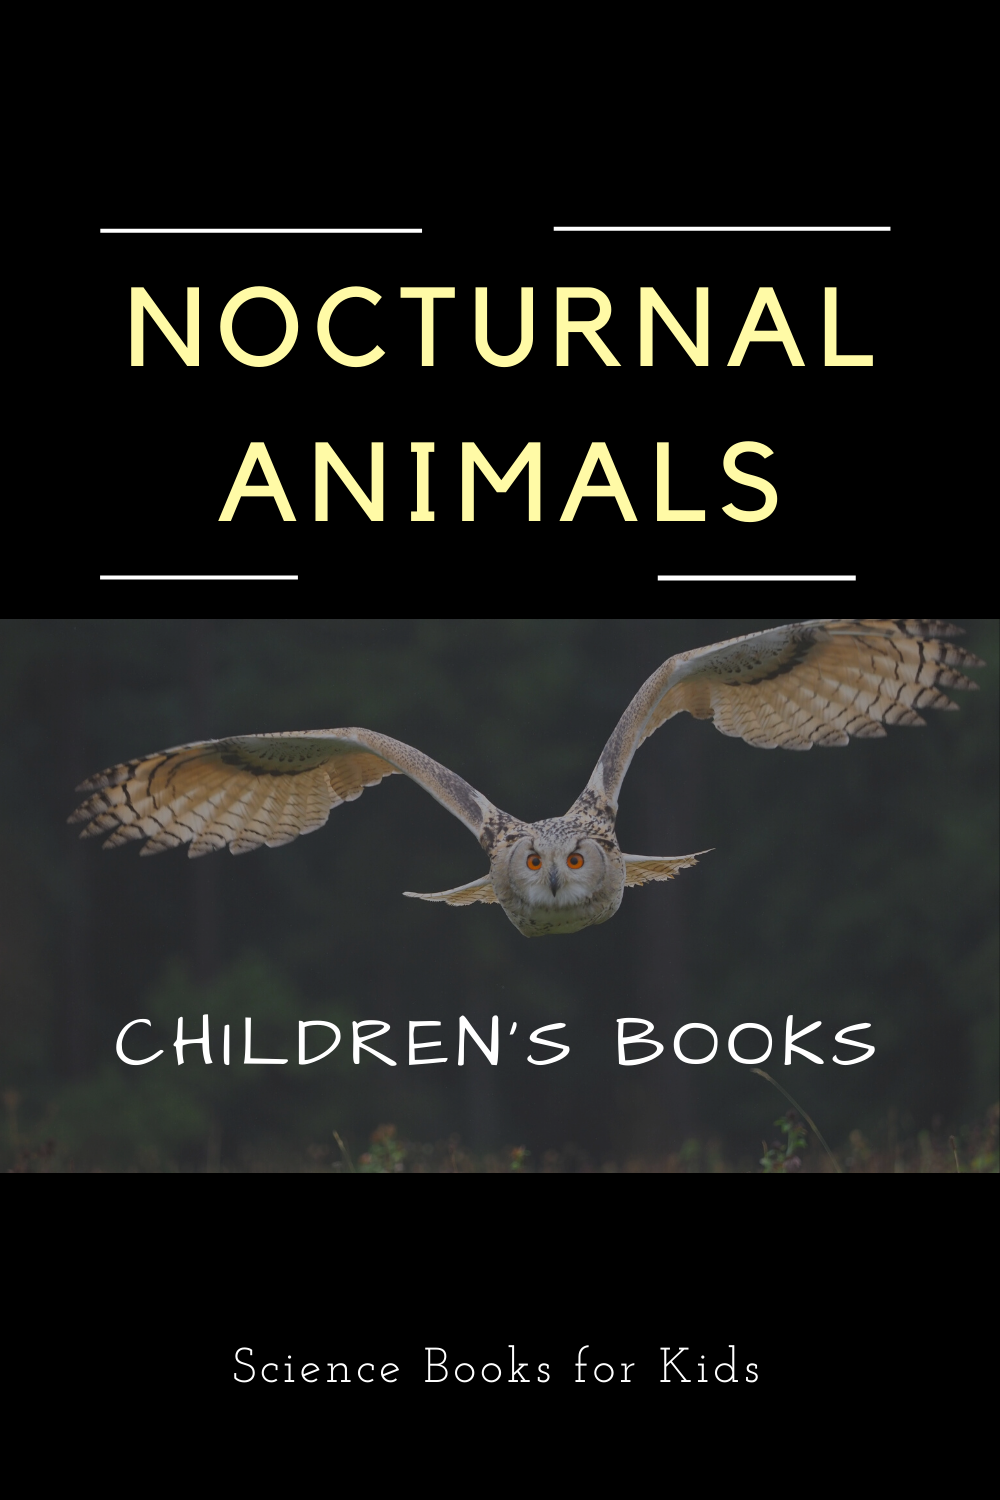 Growing List of Children's Books About Nocturnal Animals – Science Books  for Kids